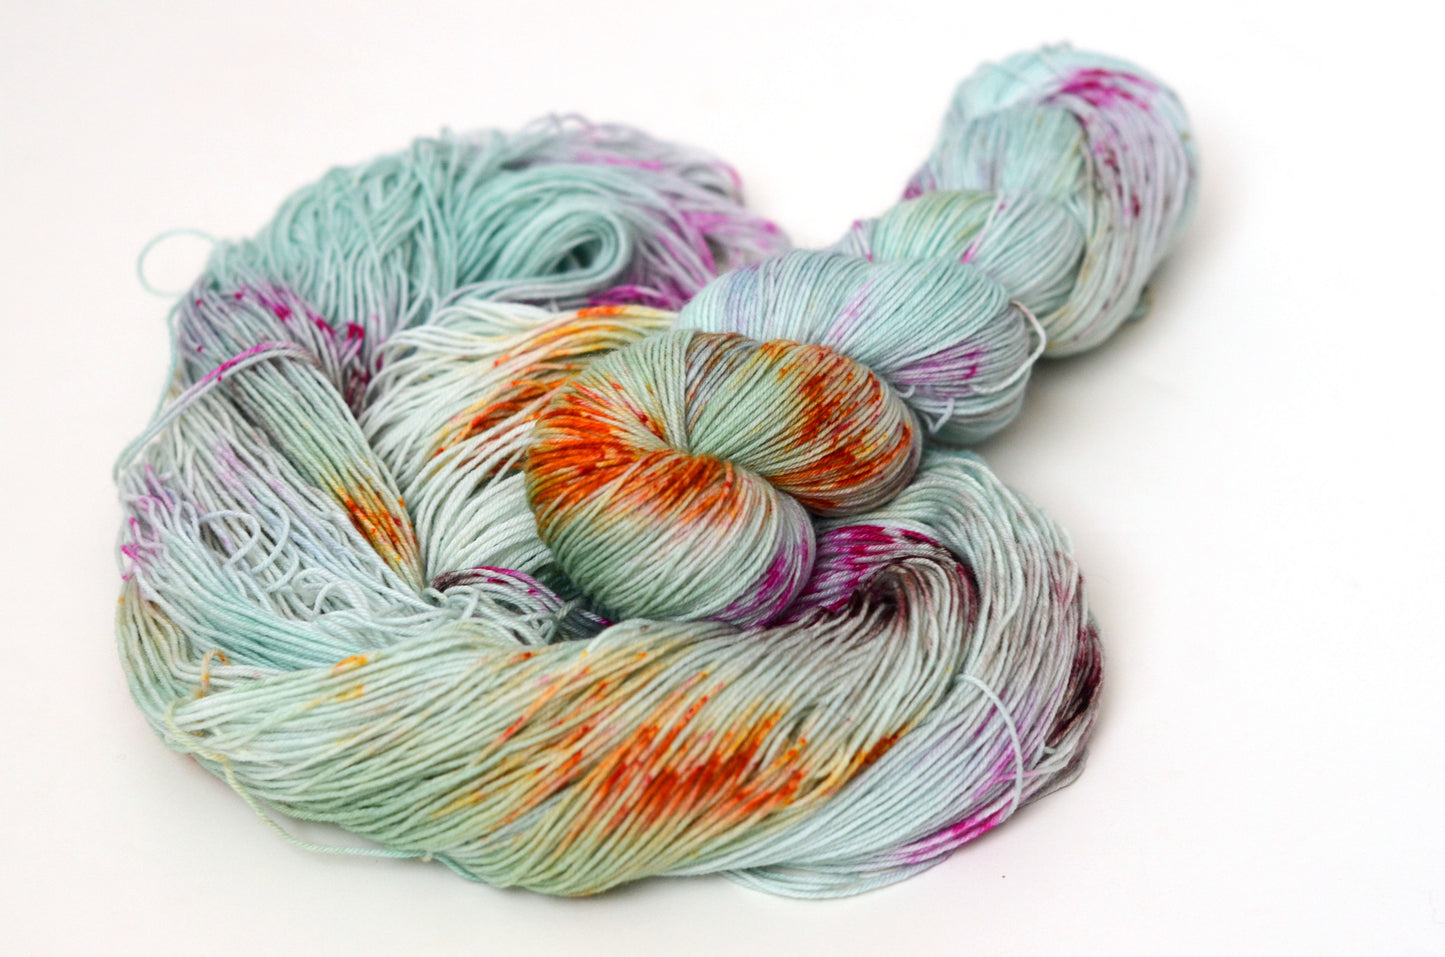 Toil & Trouble Hand Dyed Yarn - Allegory Merino Singles